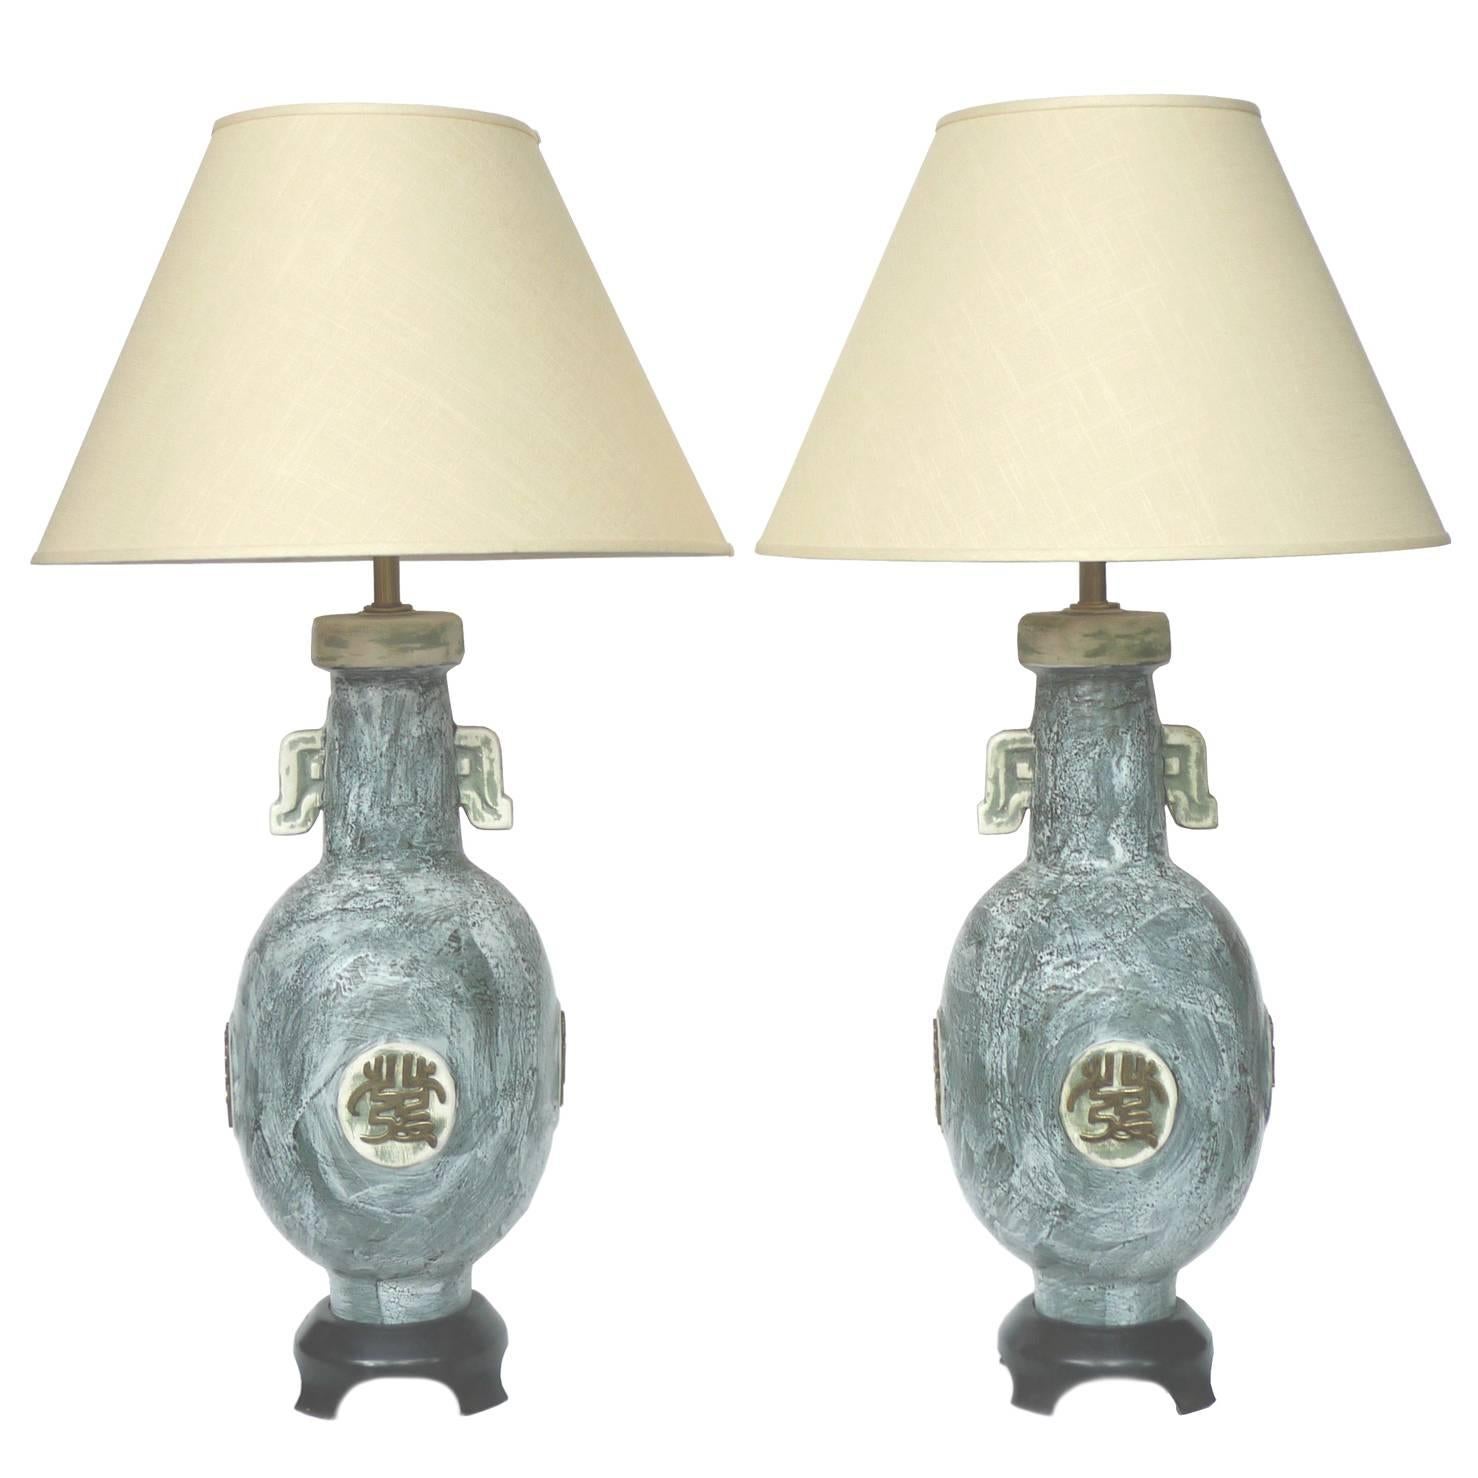 1970s Ceramic Table Lamps by Marbro, Pair